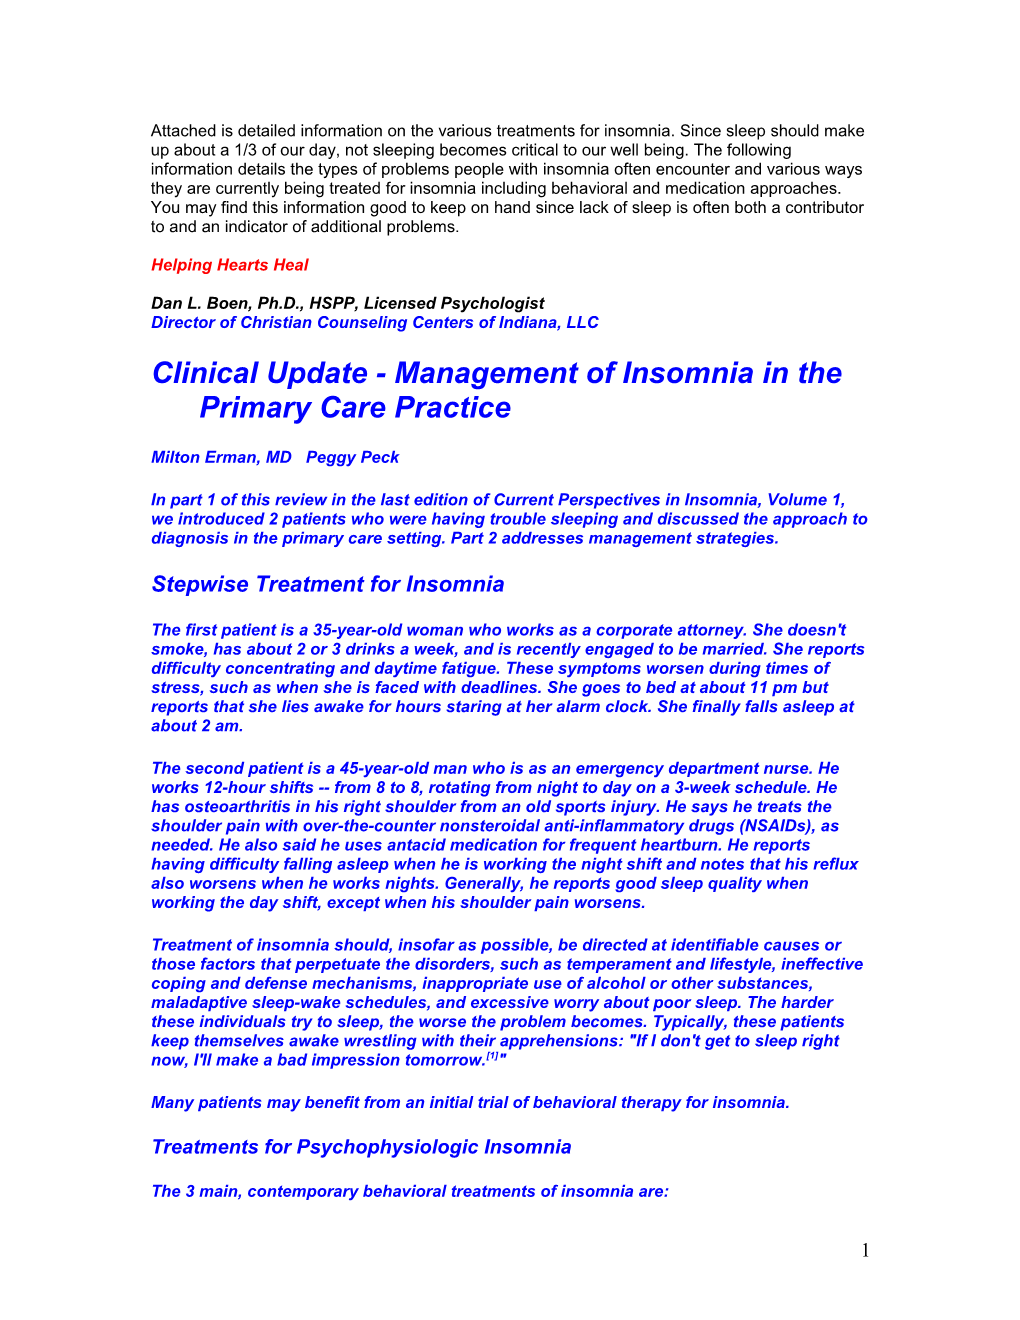 Attached Is Detailed Information on the Various Treatments for Insomnia